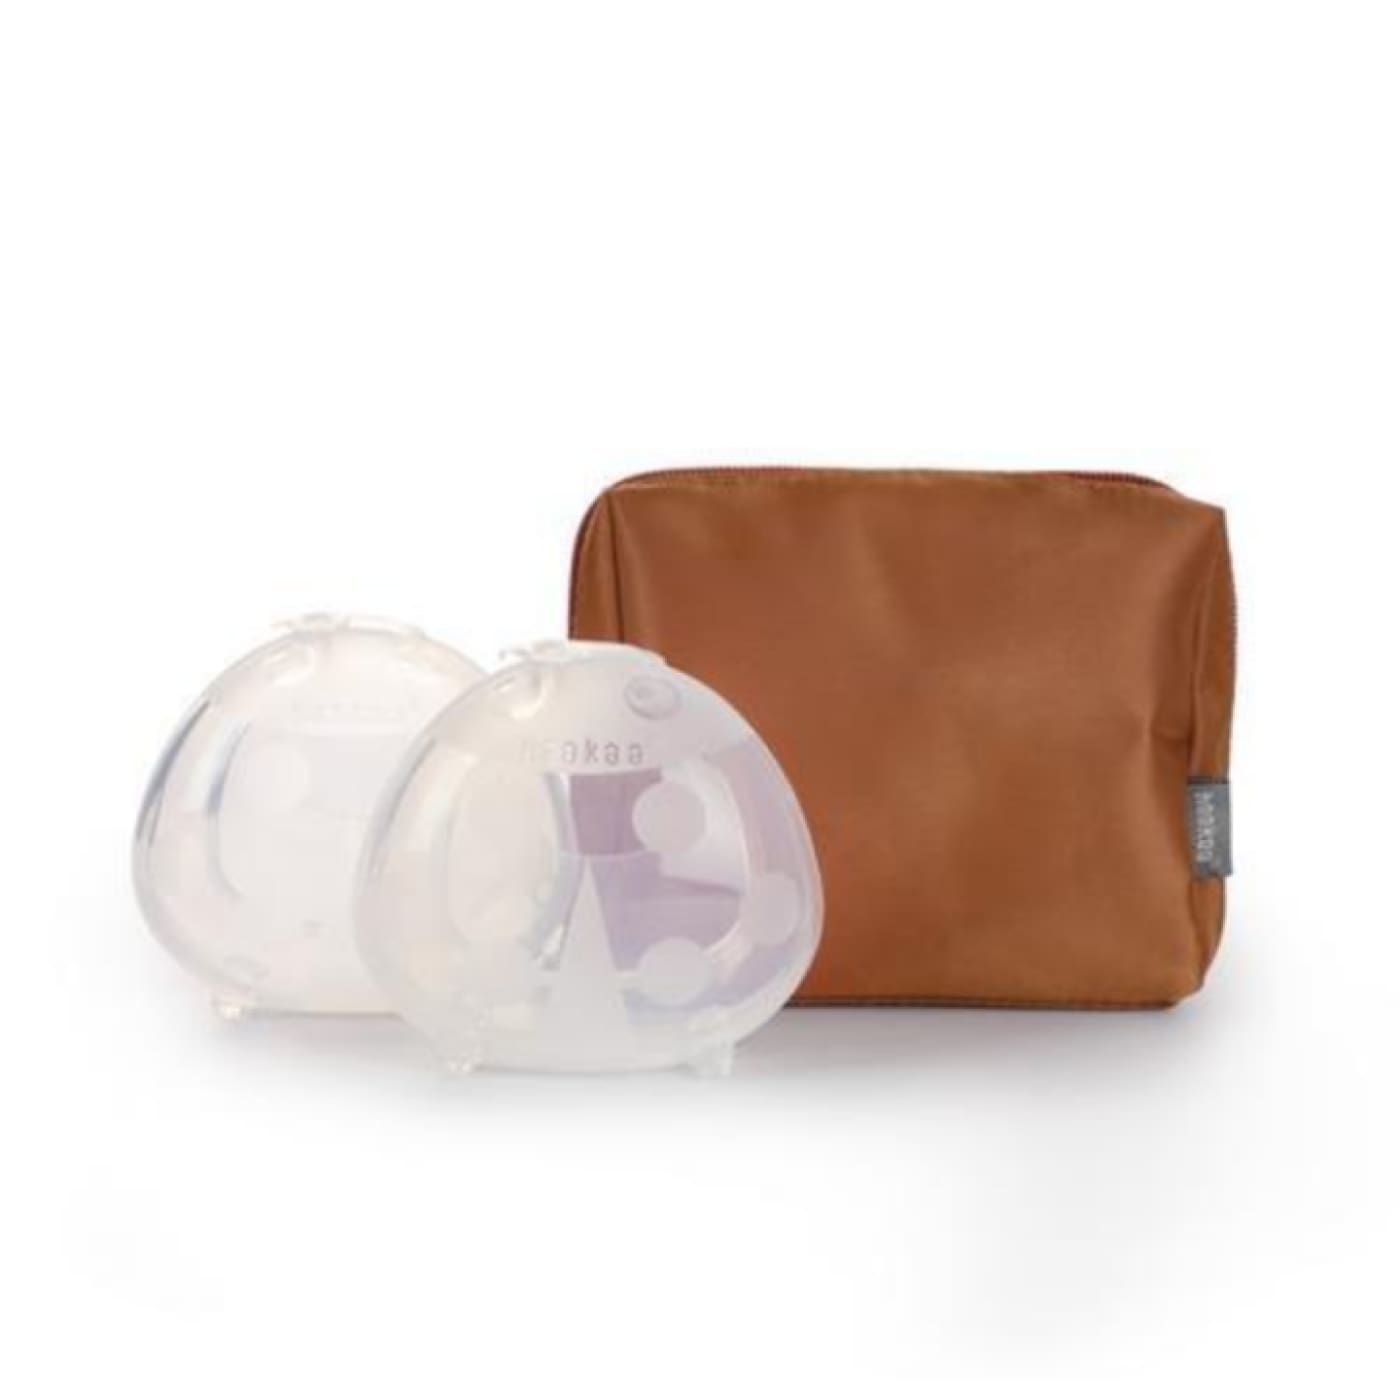 Haakaa Silicone Milk Collector 2pack with Free Gift - Camel - Camel - NURSING & FEEDING - BREAST PUMPS/ACCESSORIES